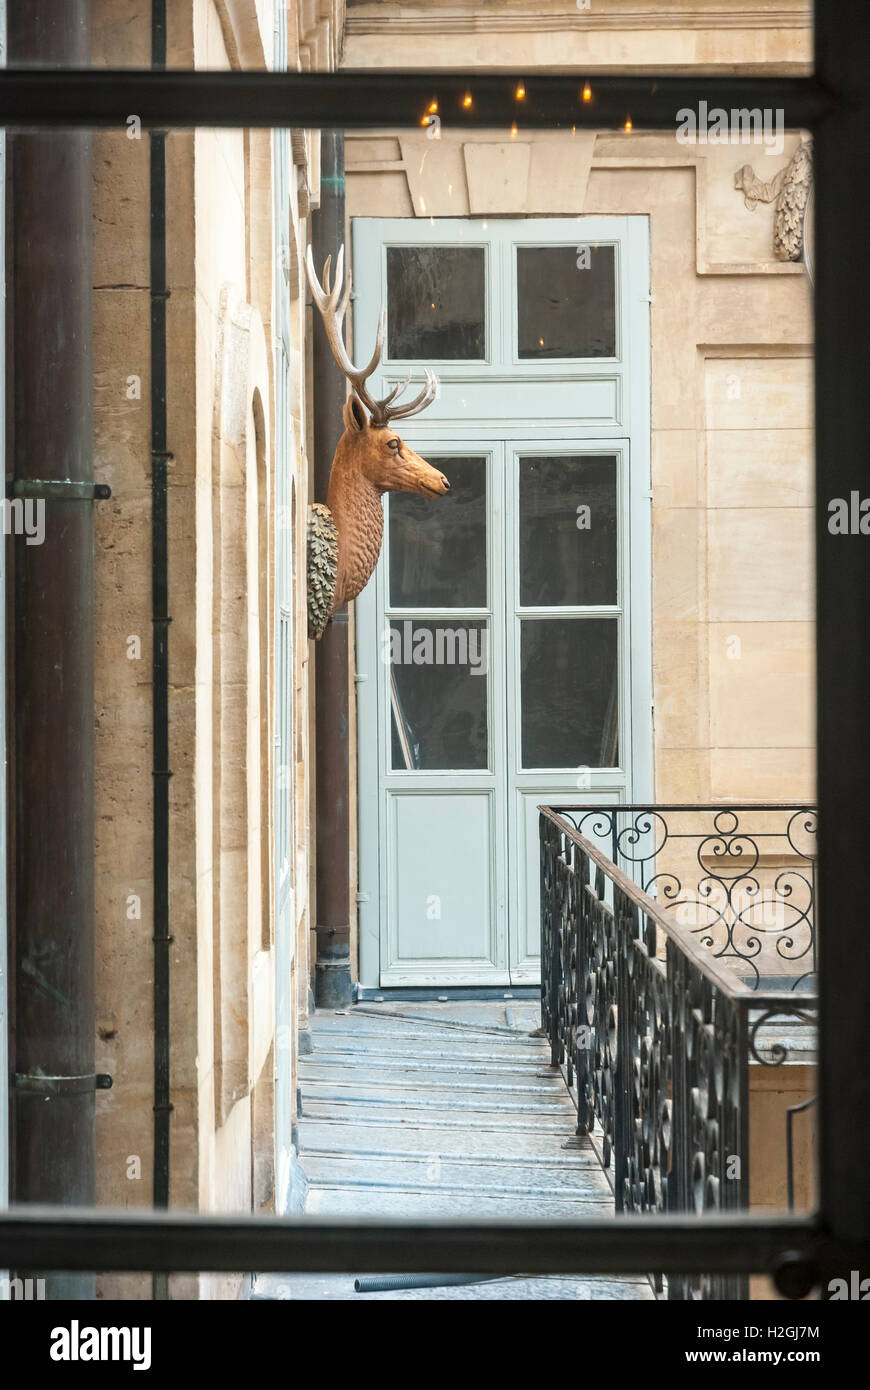 Deer sculpture on the wall of Versailles Palace Stock Photo